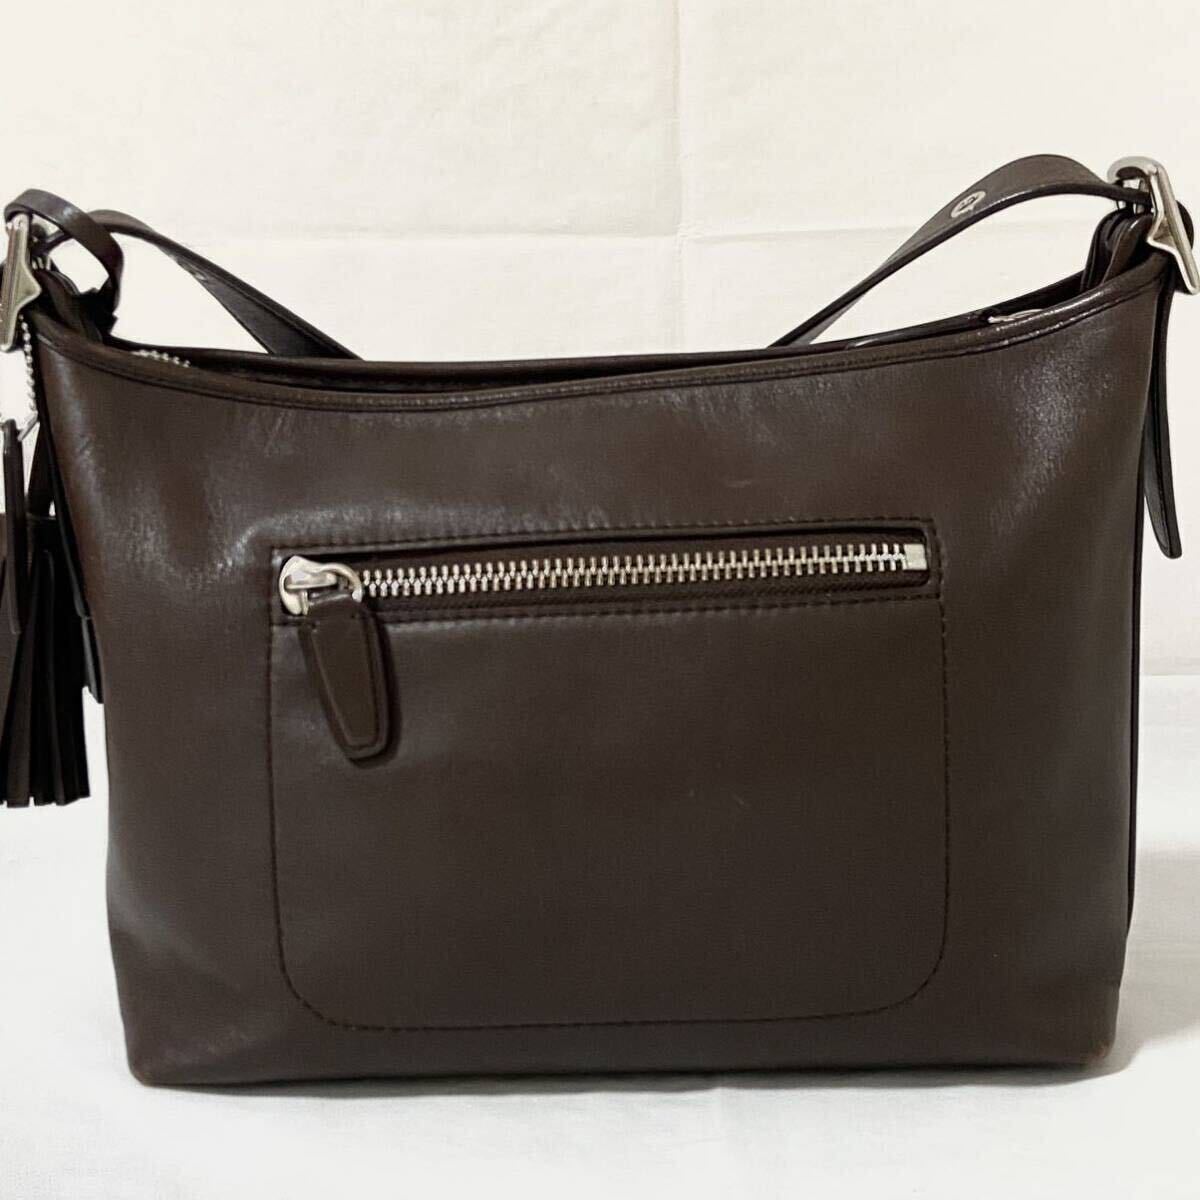 1 jpy * beautiful goods * postage nationwide equal *COACH Coach shoulder bag diagonal .. leather Brown 